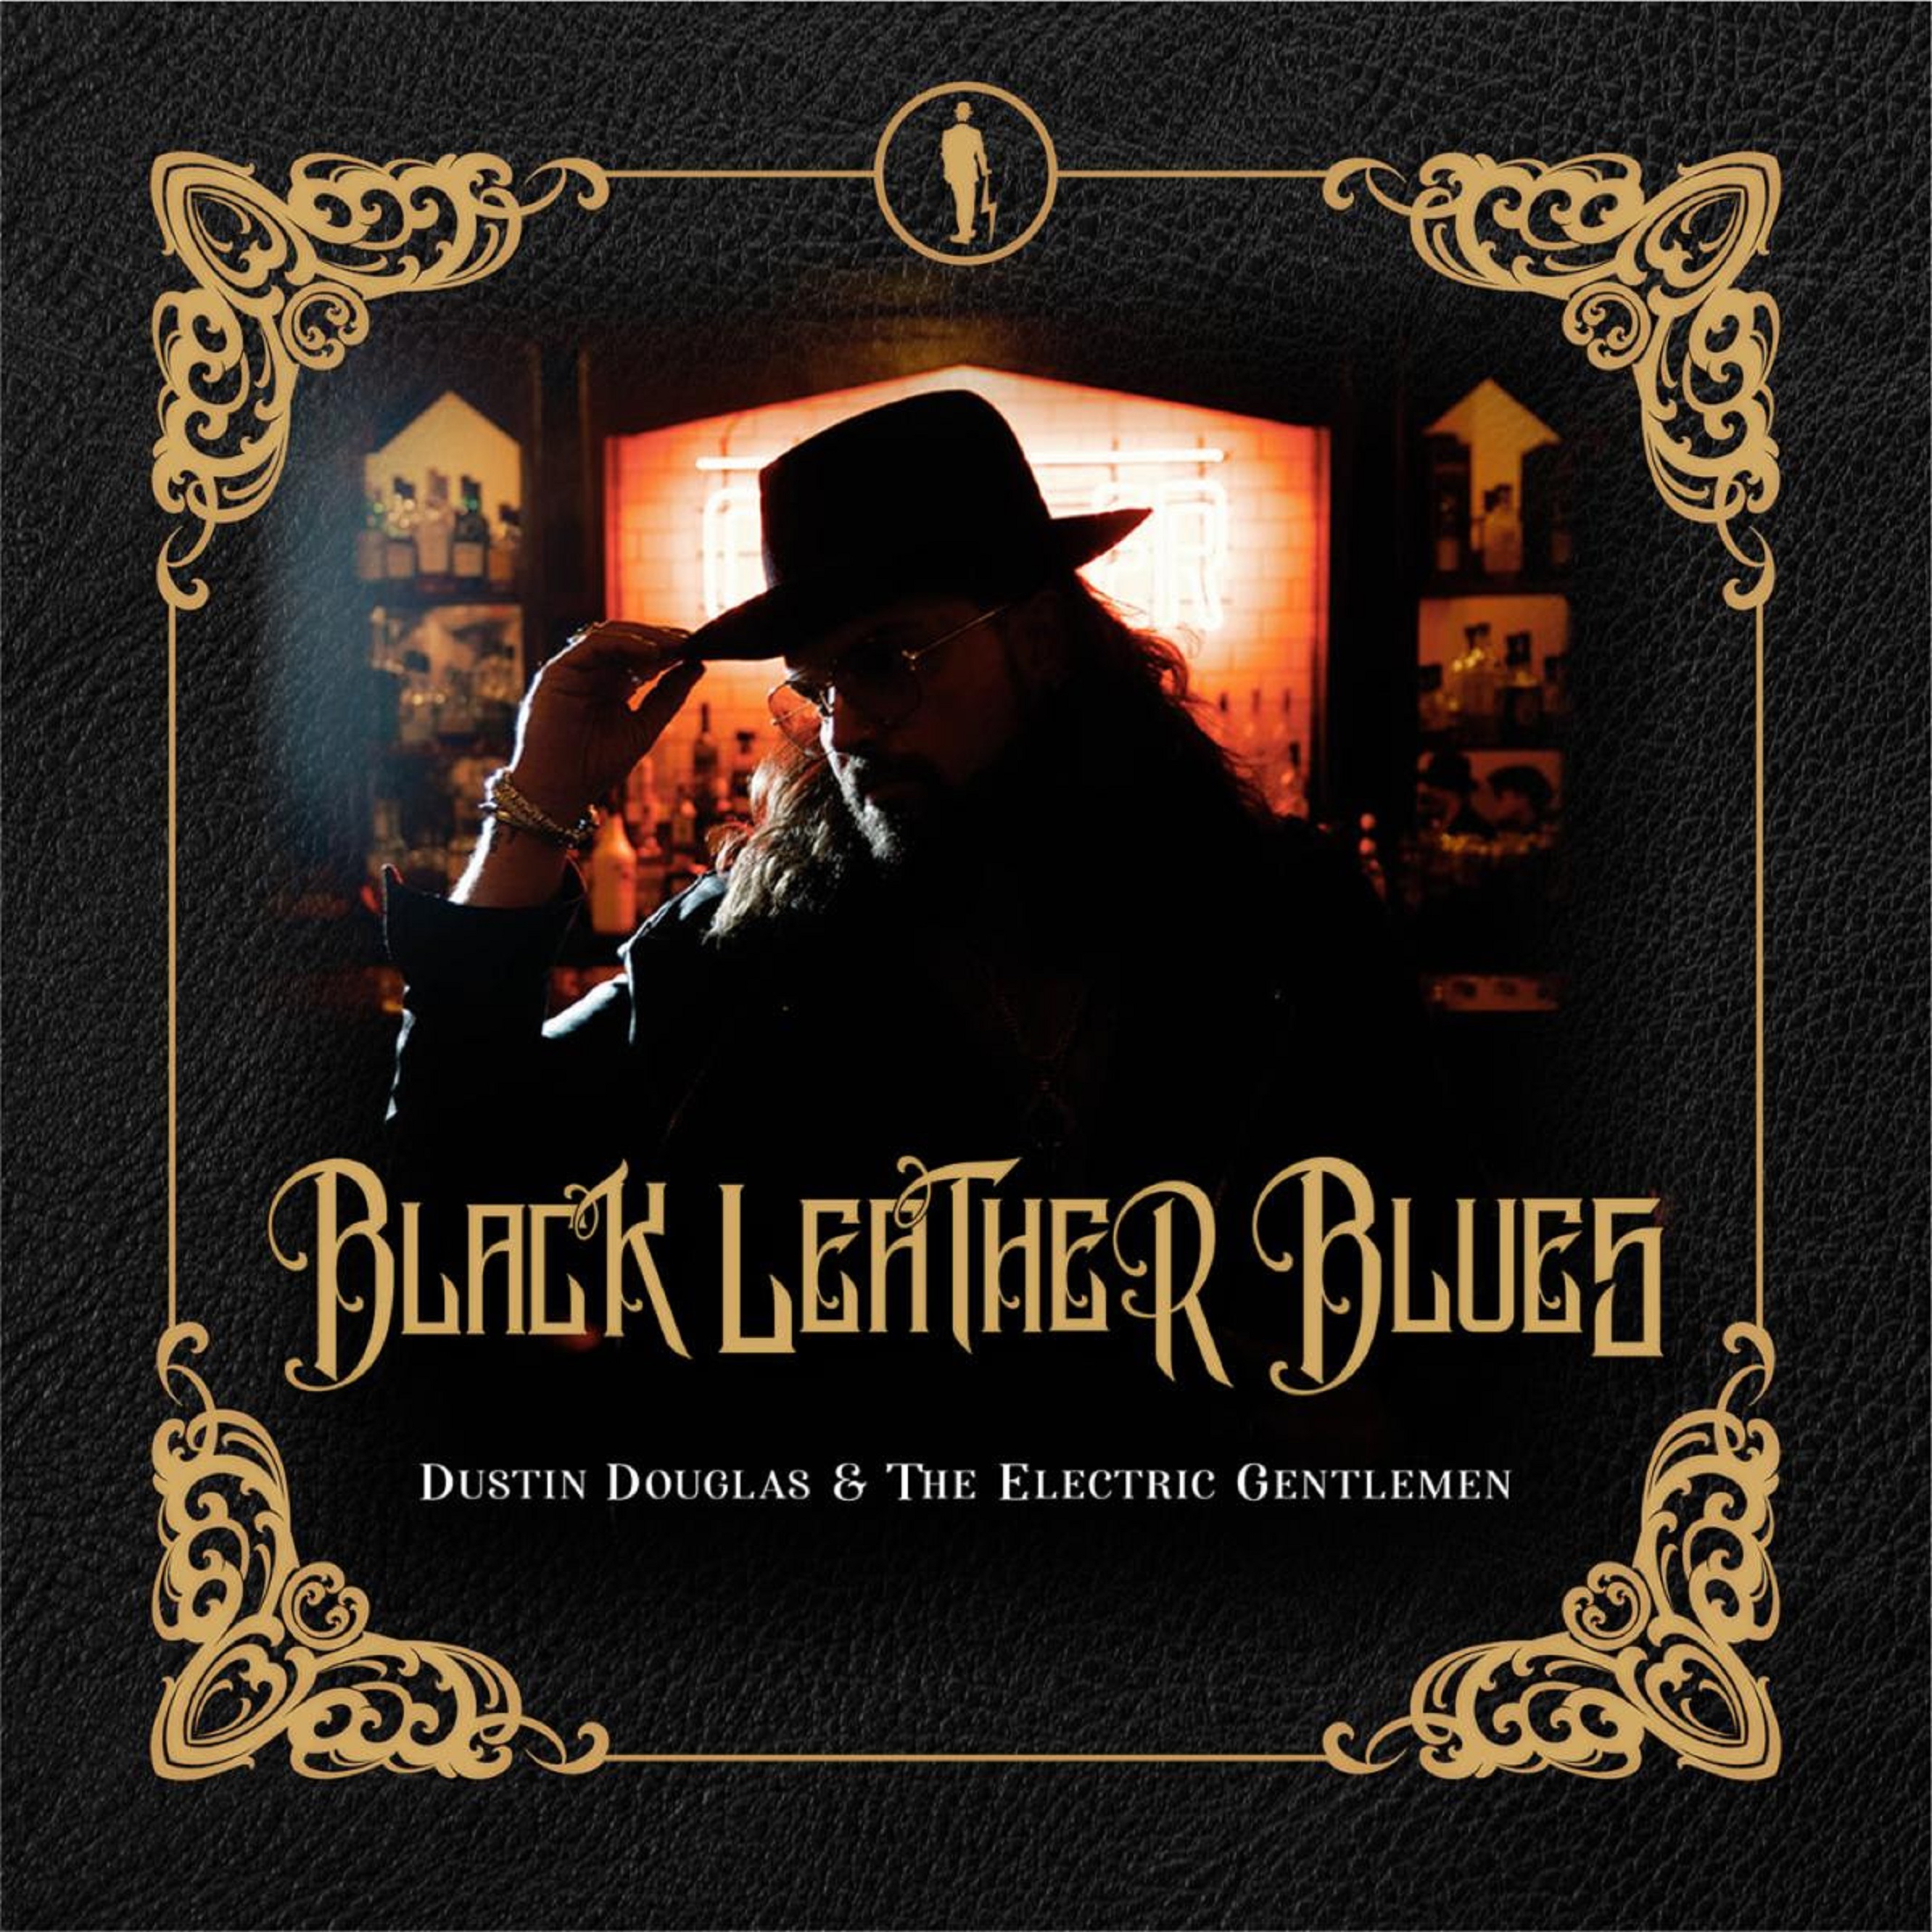 DUSTIN DOUGLAS & THE ELECTRIC GENTLEMEN Roll Out Video For Moody Acoustic Ballad “Change” From ‘Black Leather Blues’ Album Out April 14